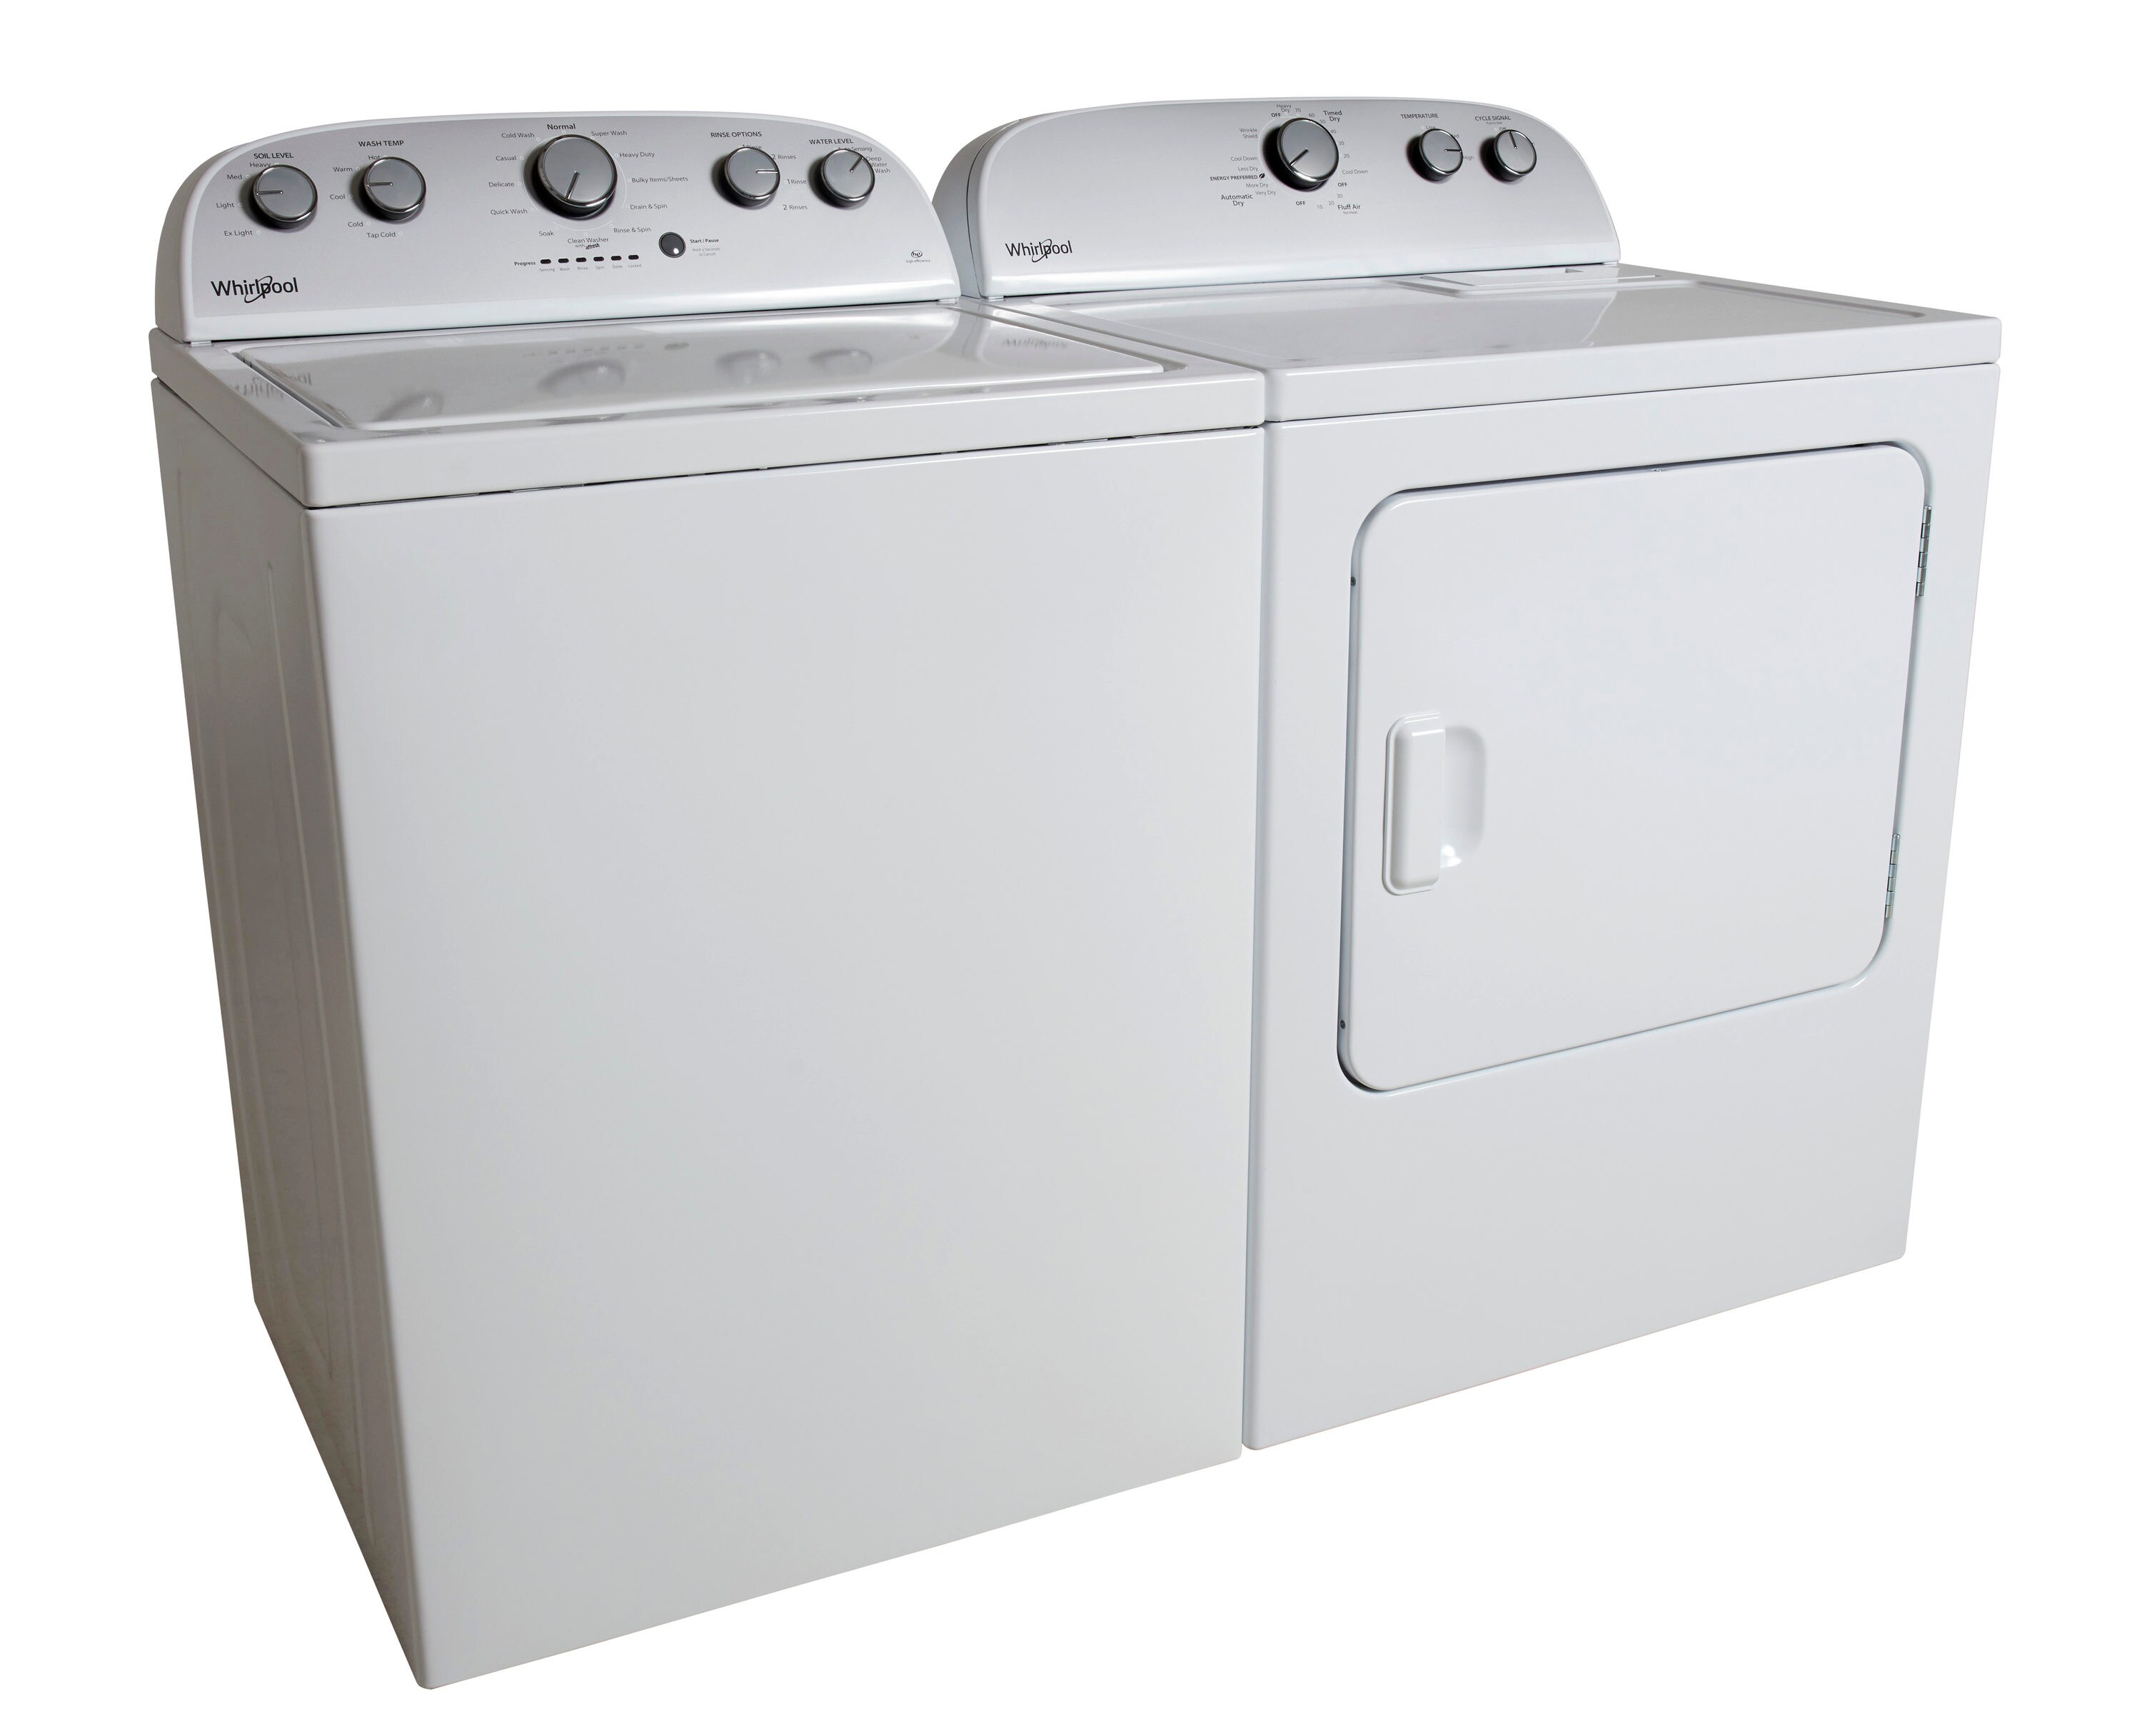 Whirlpool 7-cu ft Electric Dryer (White) - While Supplies Last in the Electric Dryers department at Lowes.com